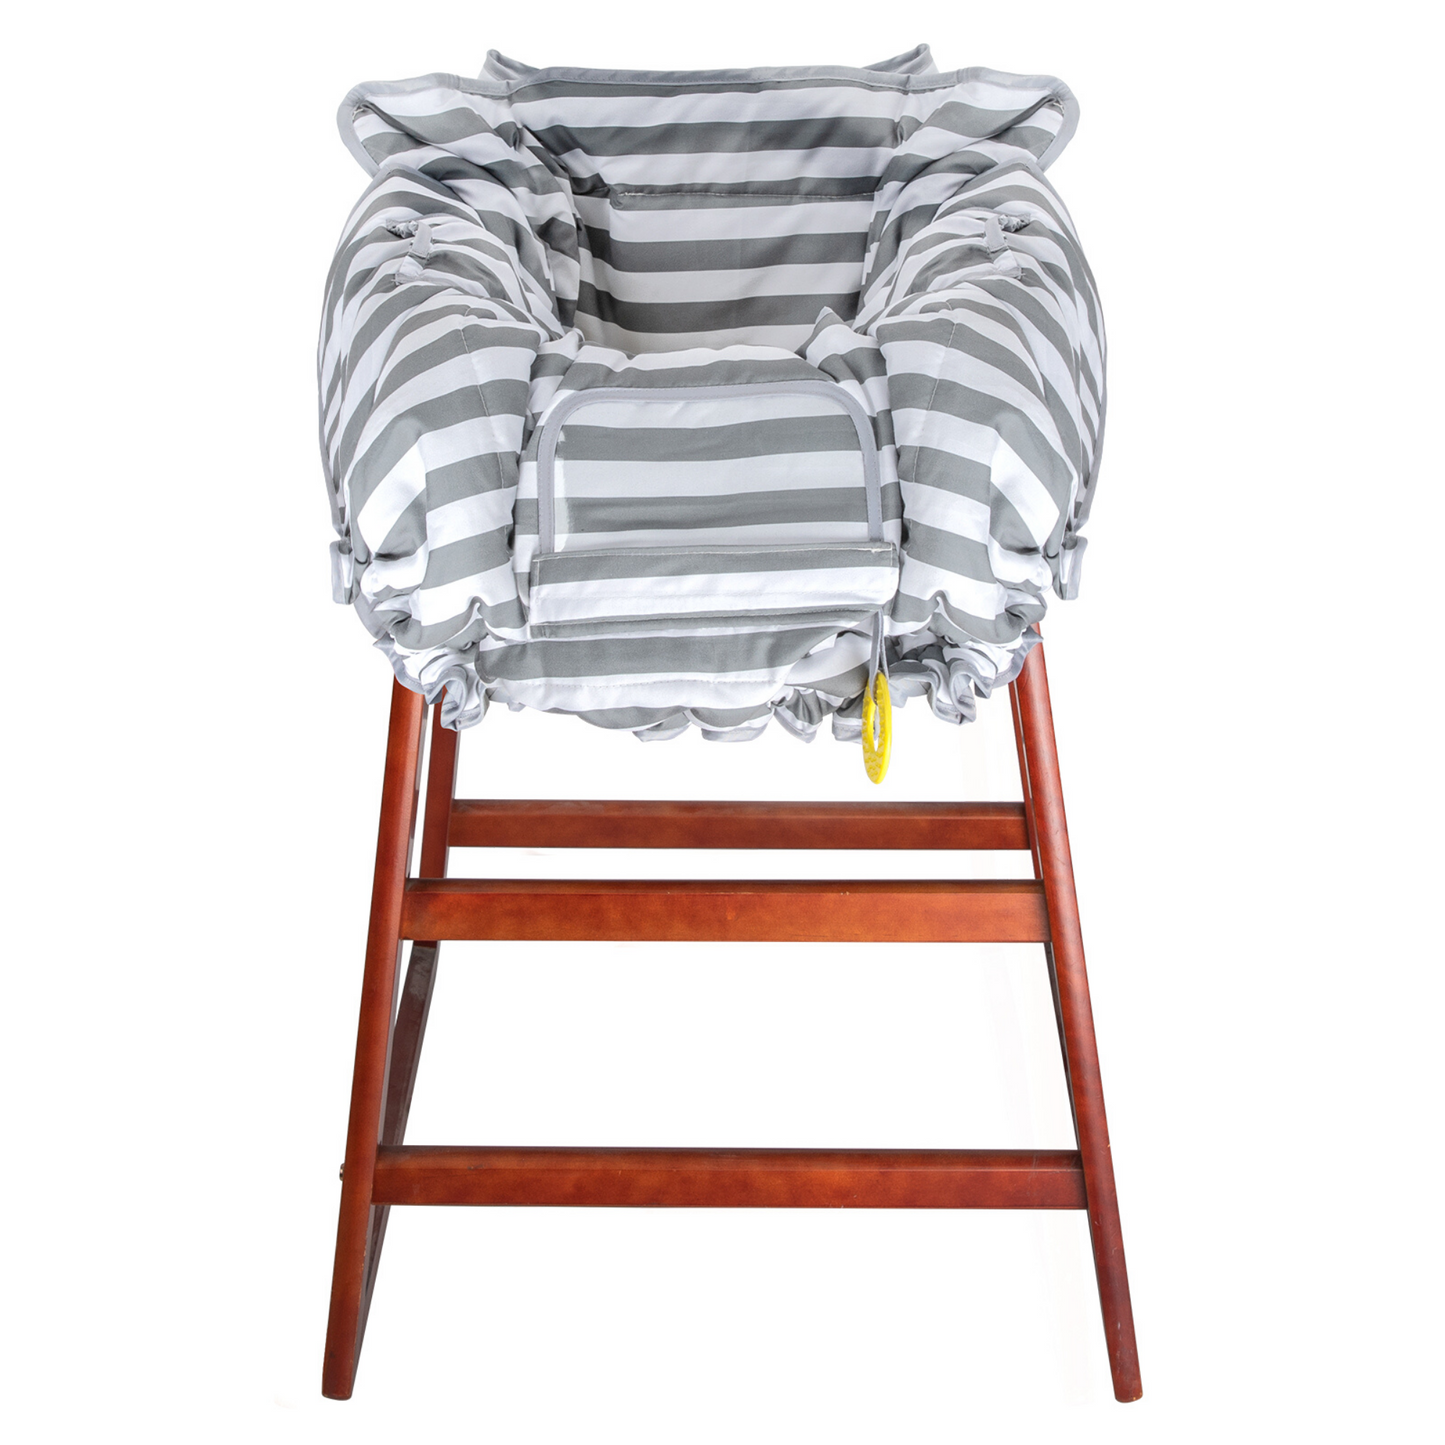 Shopping Cart & Highchair Cover - Gray and White Stripe with Cushion